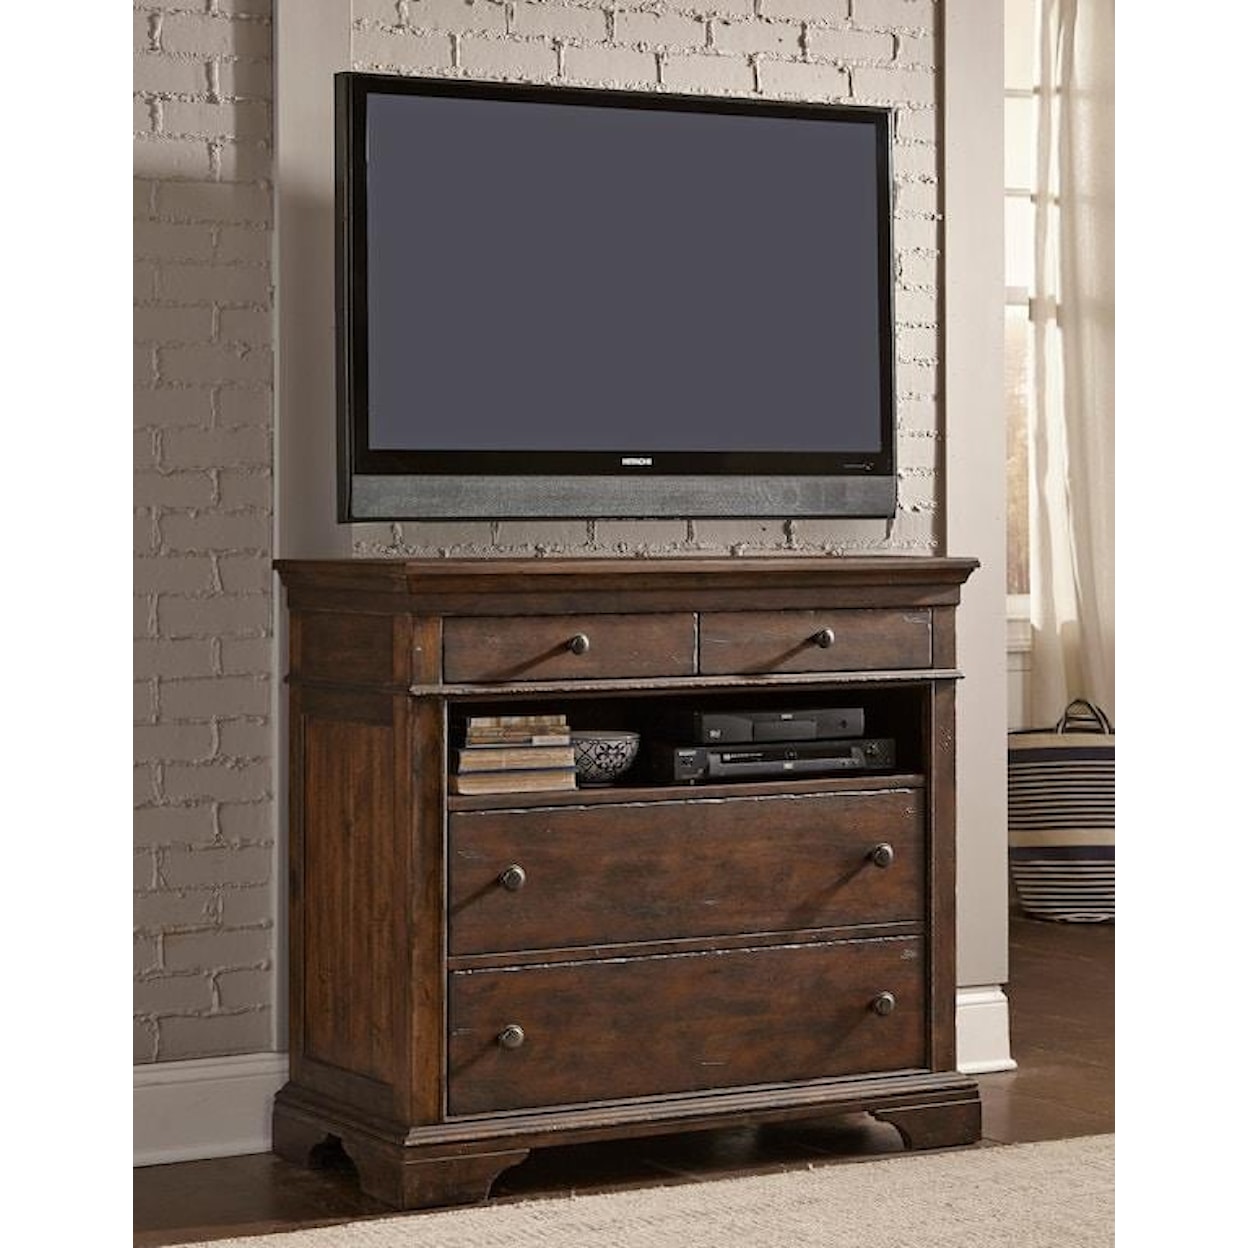 Trisha Yearwood Home Collection by Legacy Classic Trisha Yearwood Home Stillwater Media Chest